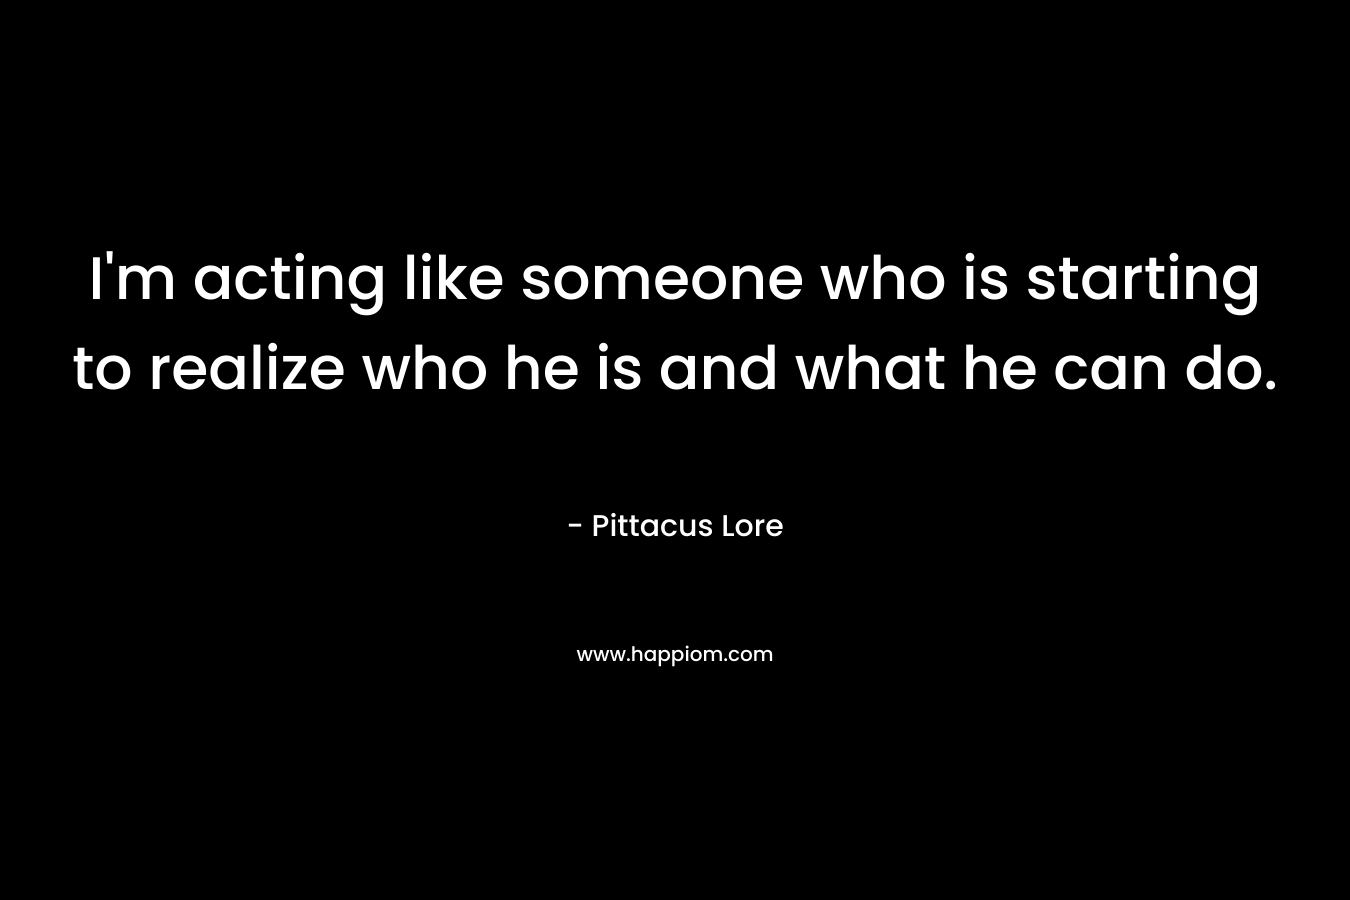 I'm acting like someone who is starting to realize who he is and what he can do.